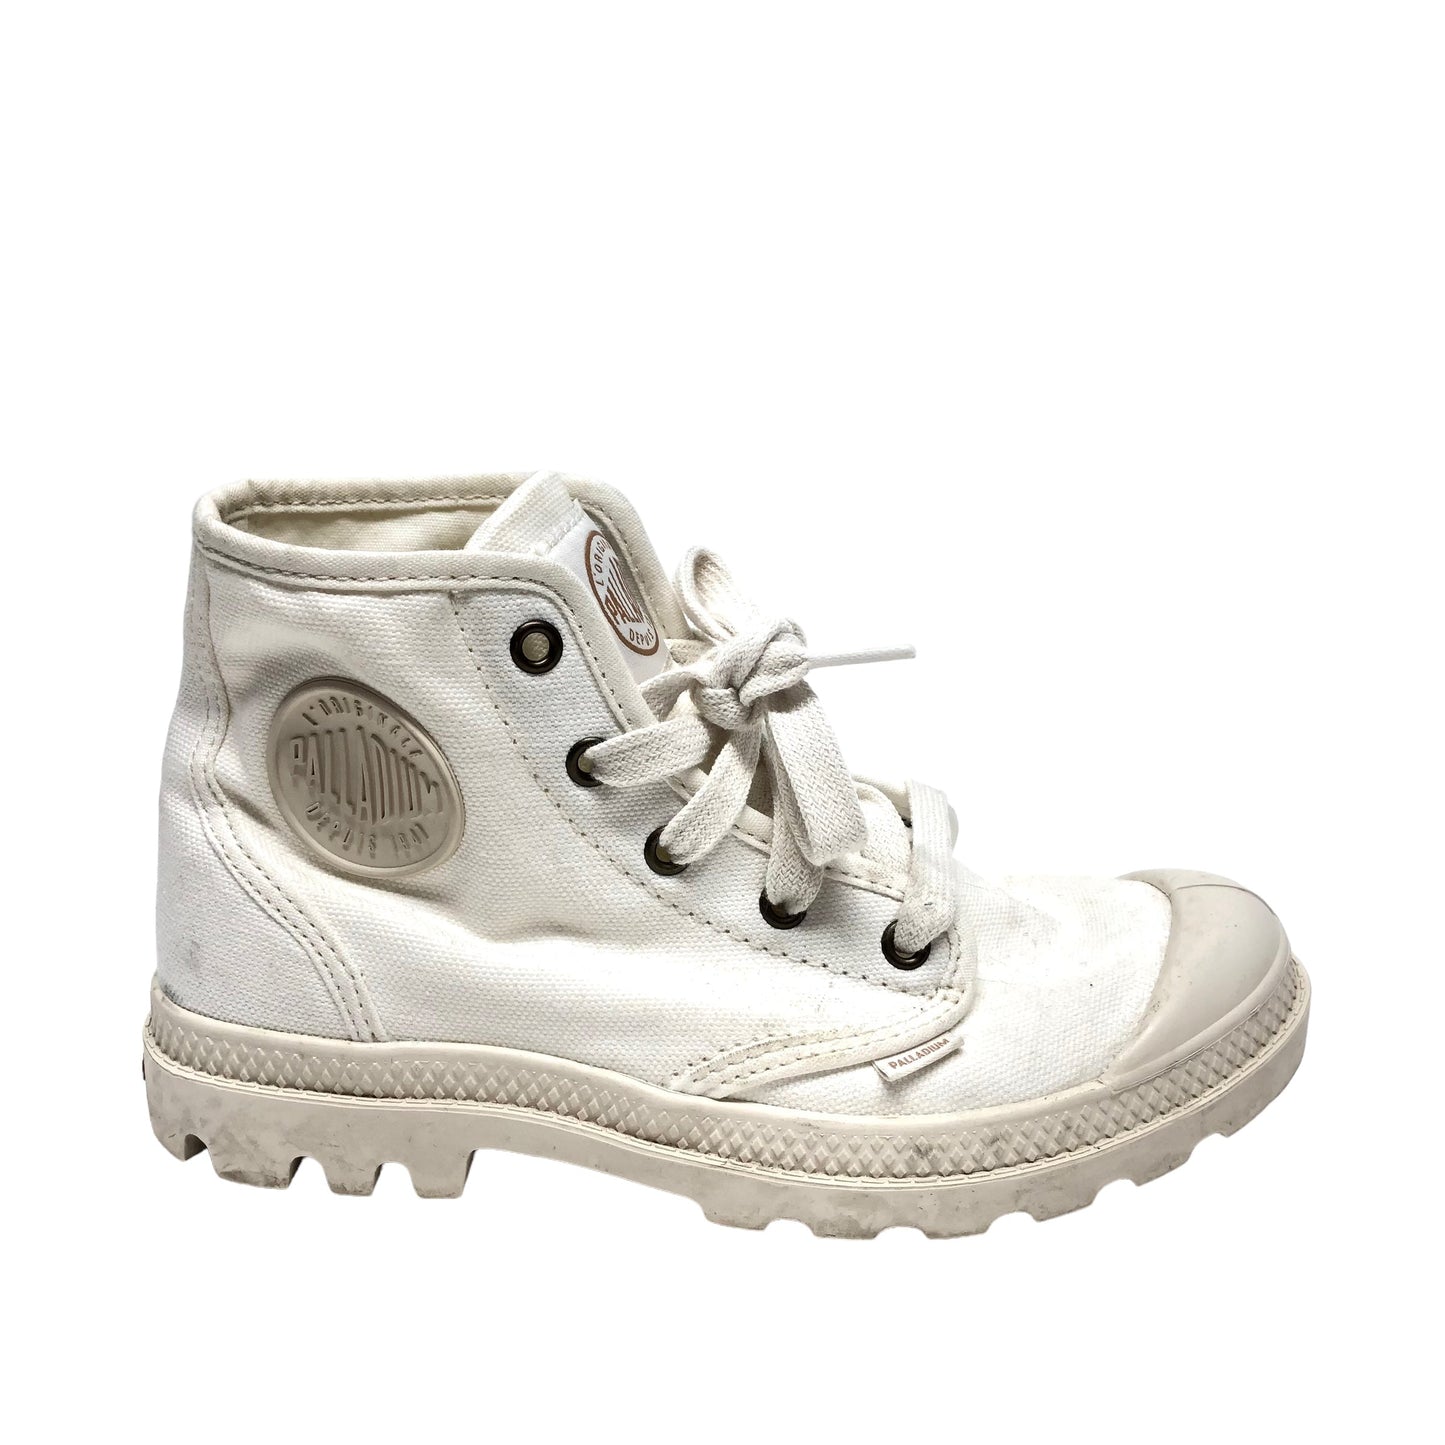 Ivory Shoes Sneakers Cmc, Size 6